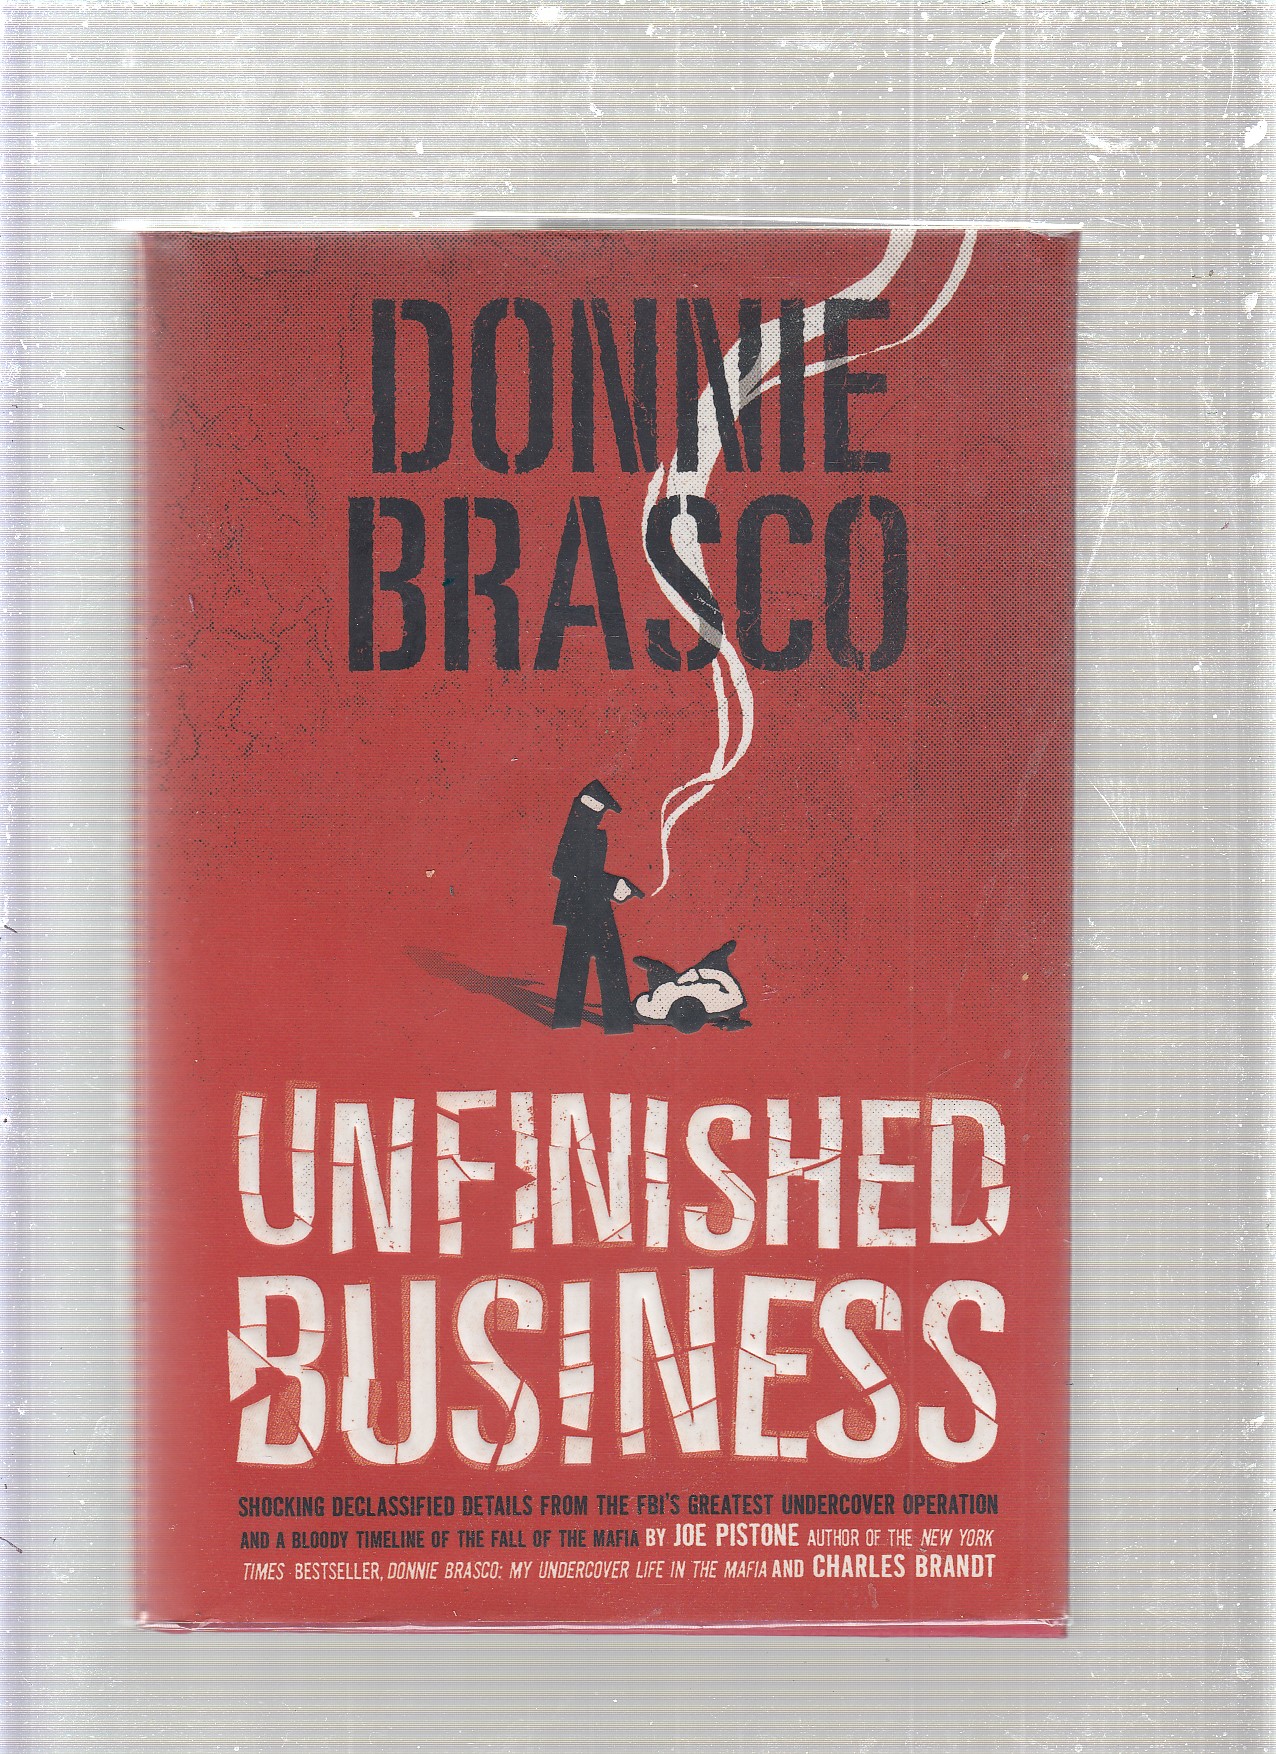 Donnie Brasco: Unfinished Business (first edition, inscribed by Pistone) - Joe (Joseph) Pistone and Charles Brant